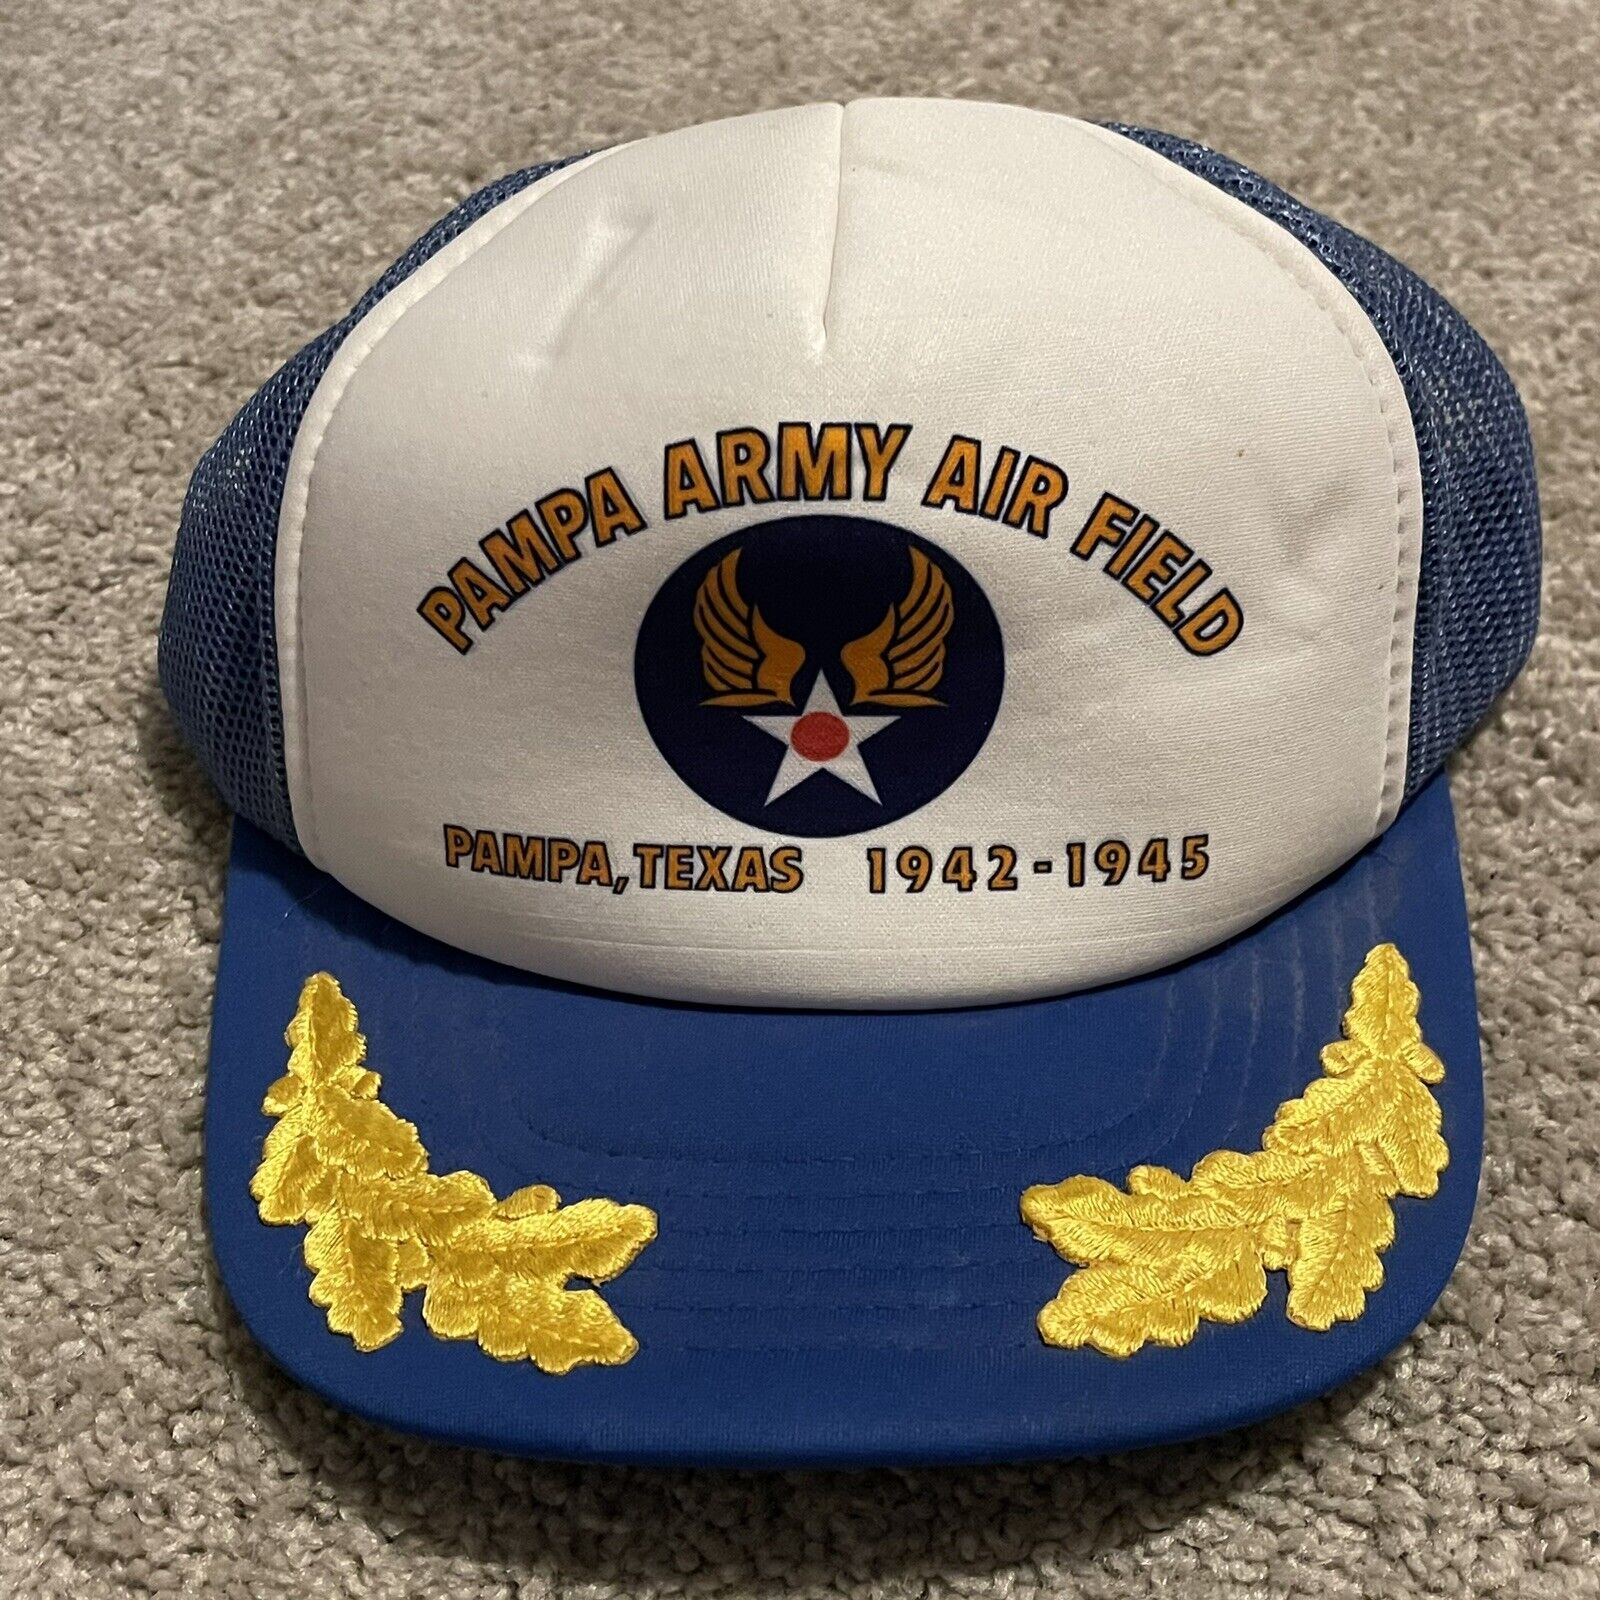 pampa army air field hat vintage rare htf WWII US SnapBack GSC Texas 1942-1945